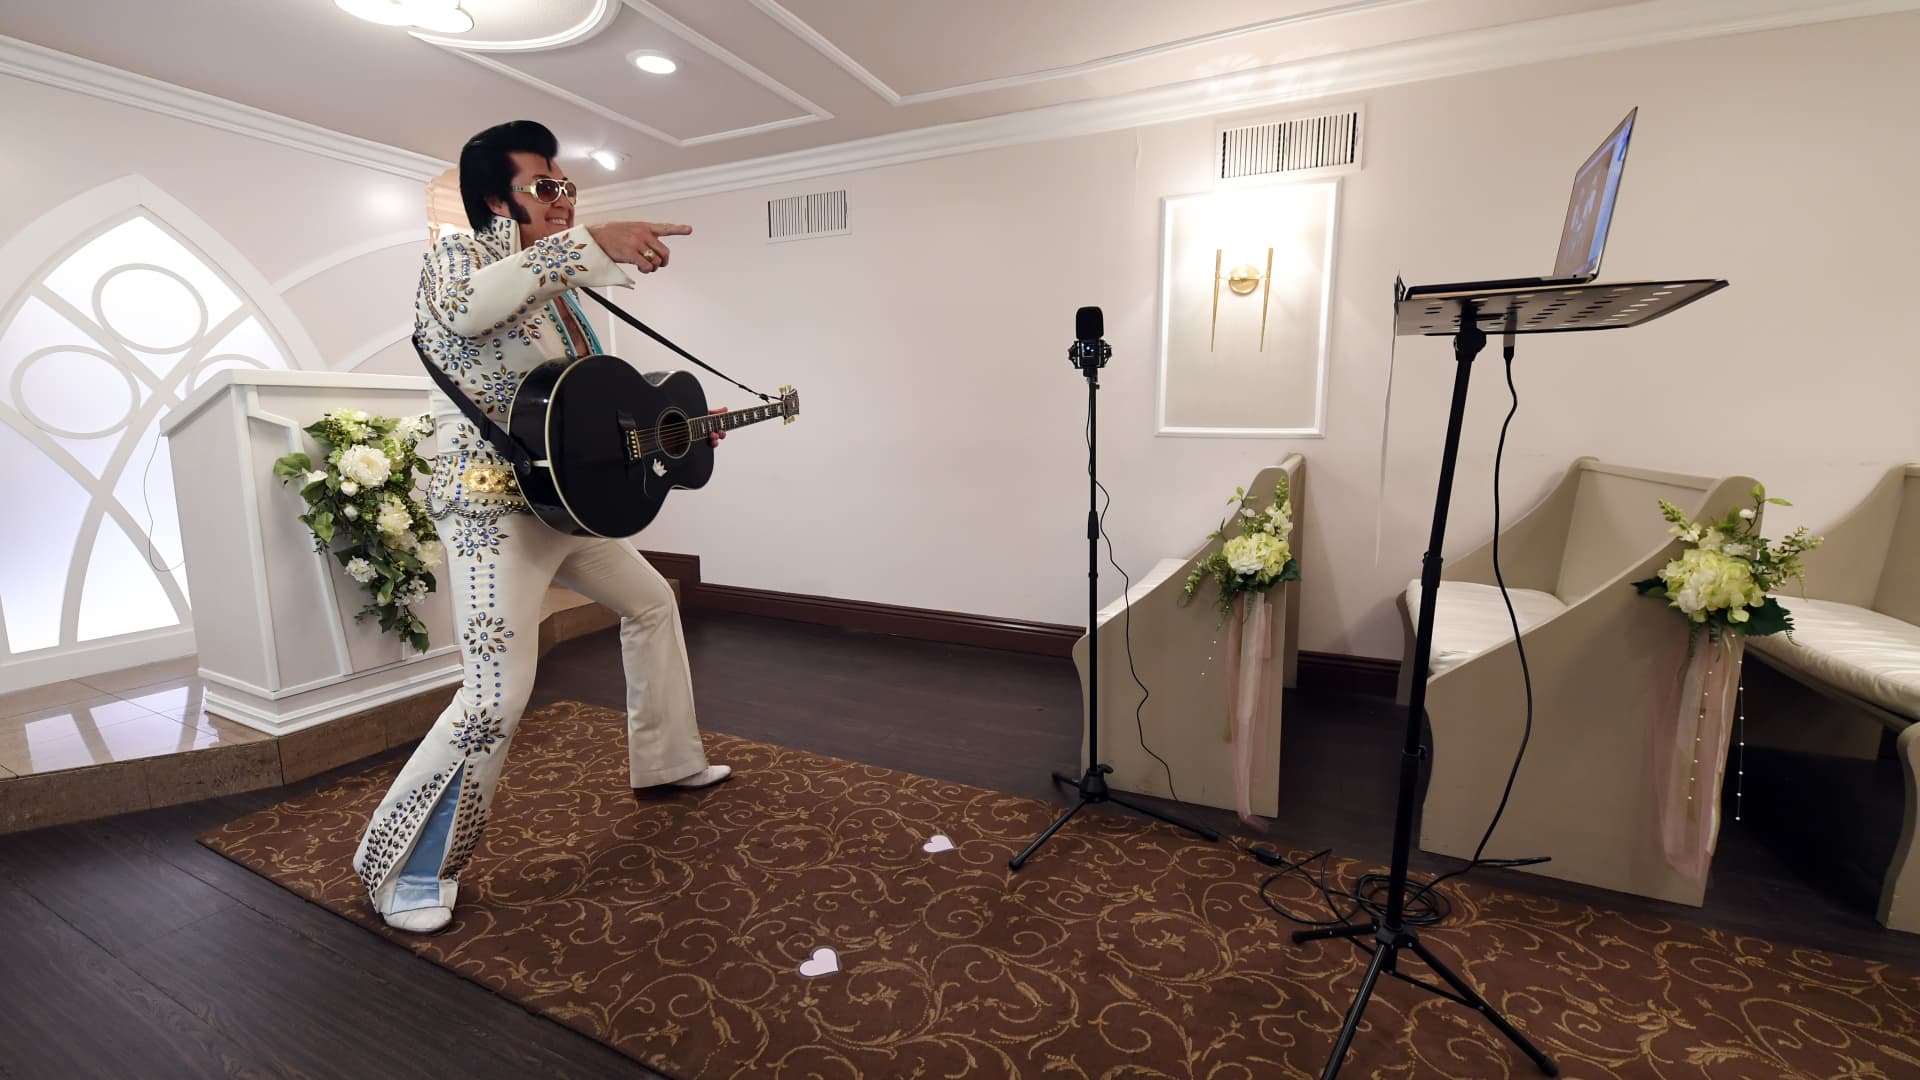 An Elvis impersonator performs a remote vow renewal ceremony during the pandemic at Graceland Wedding Chapel in Las Vegas, Nevada.